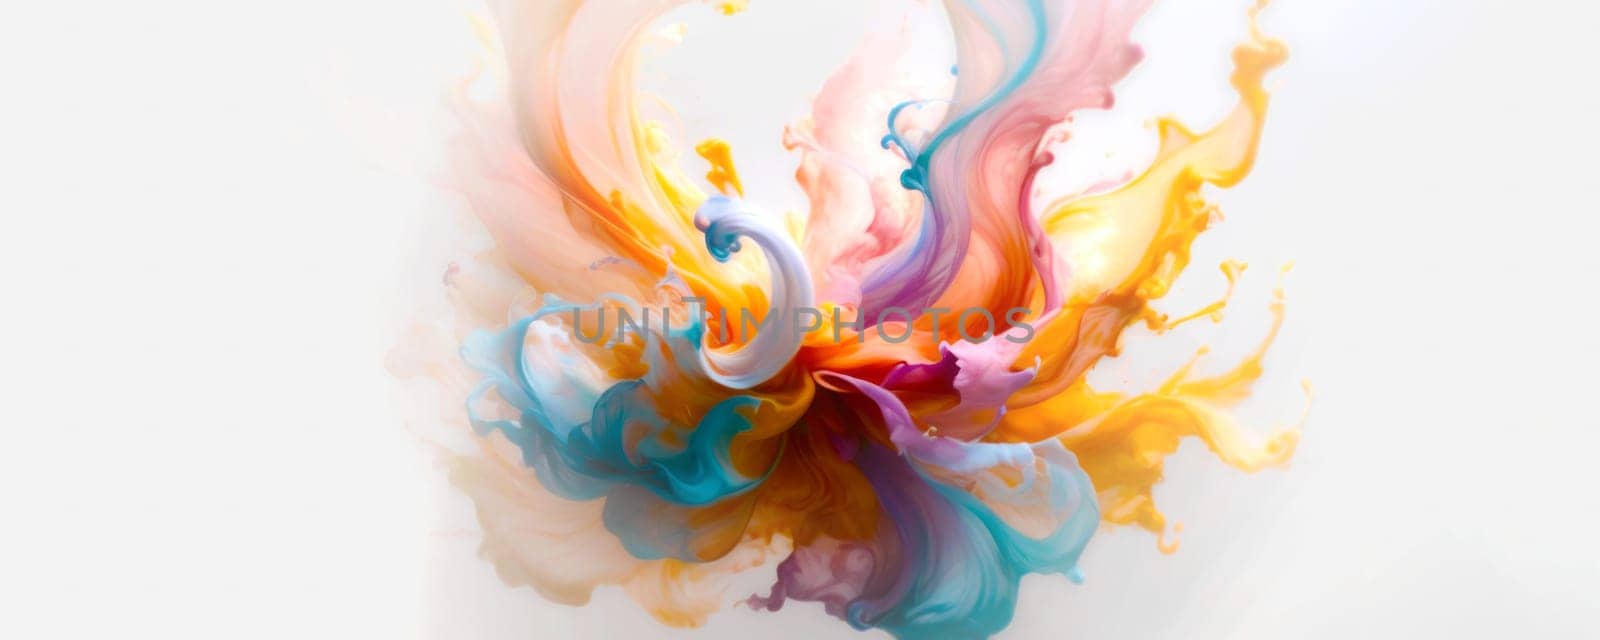 Multicolored Swirl of Ink or Paint on a White Background by nkotlyar